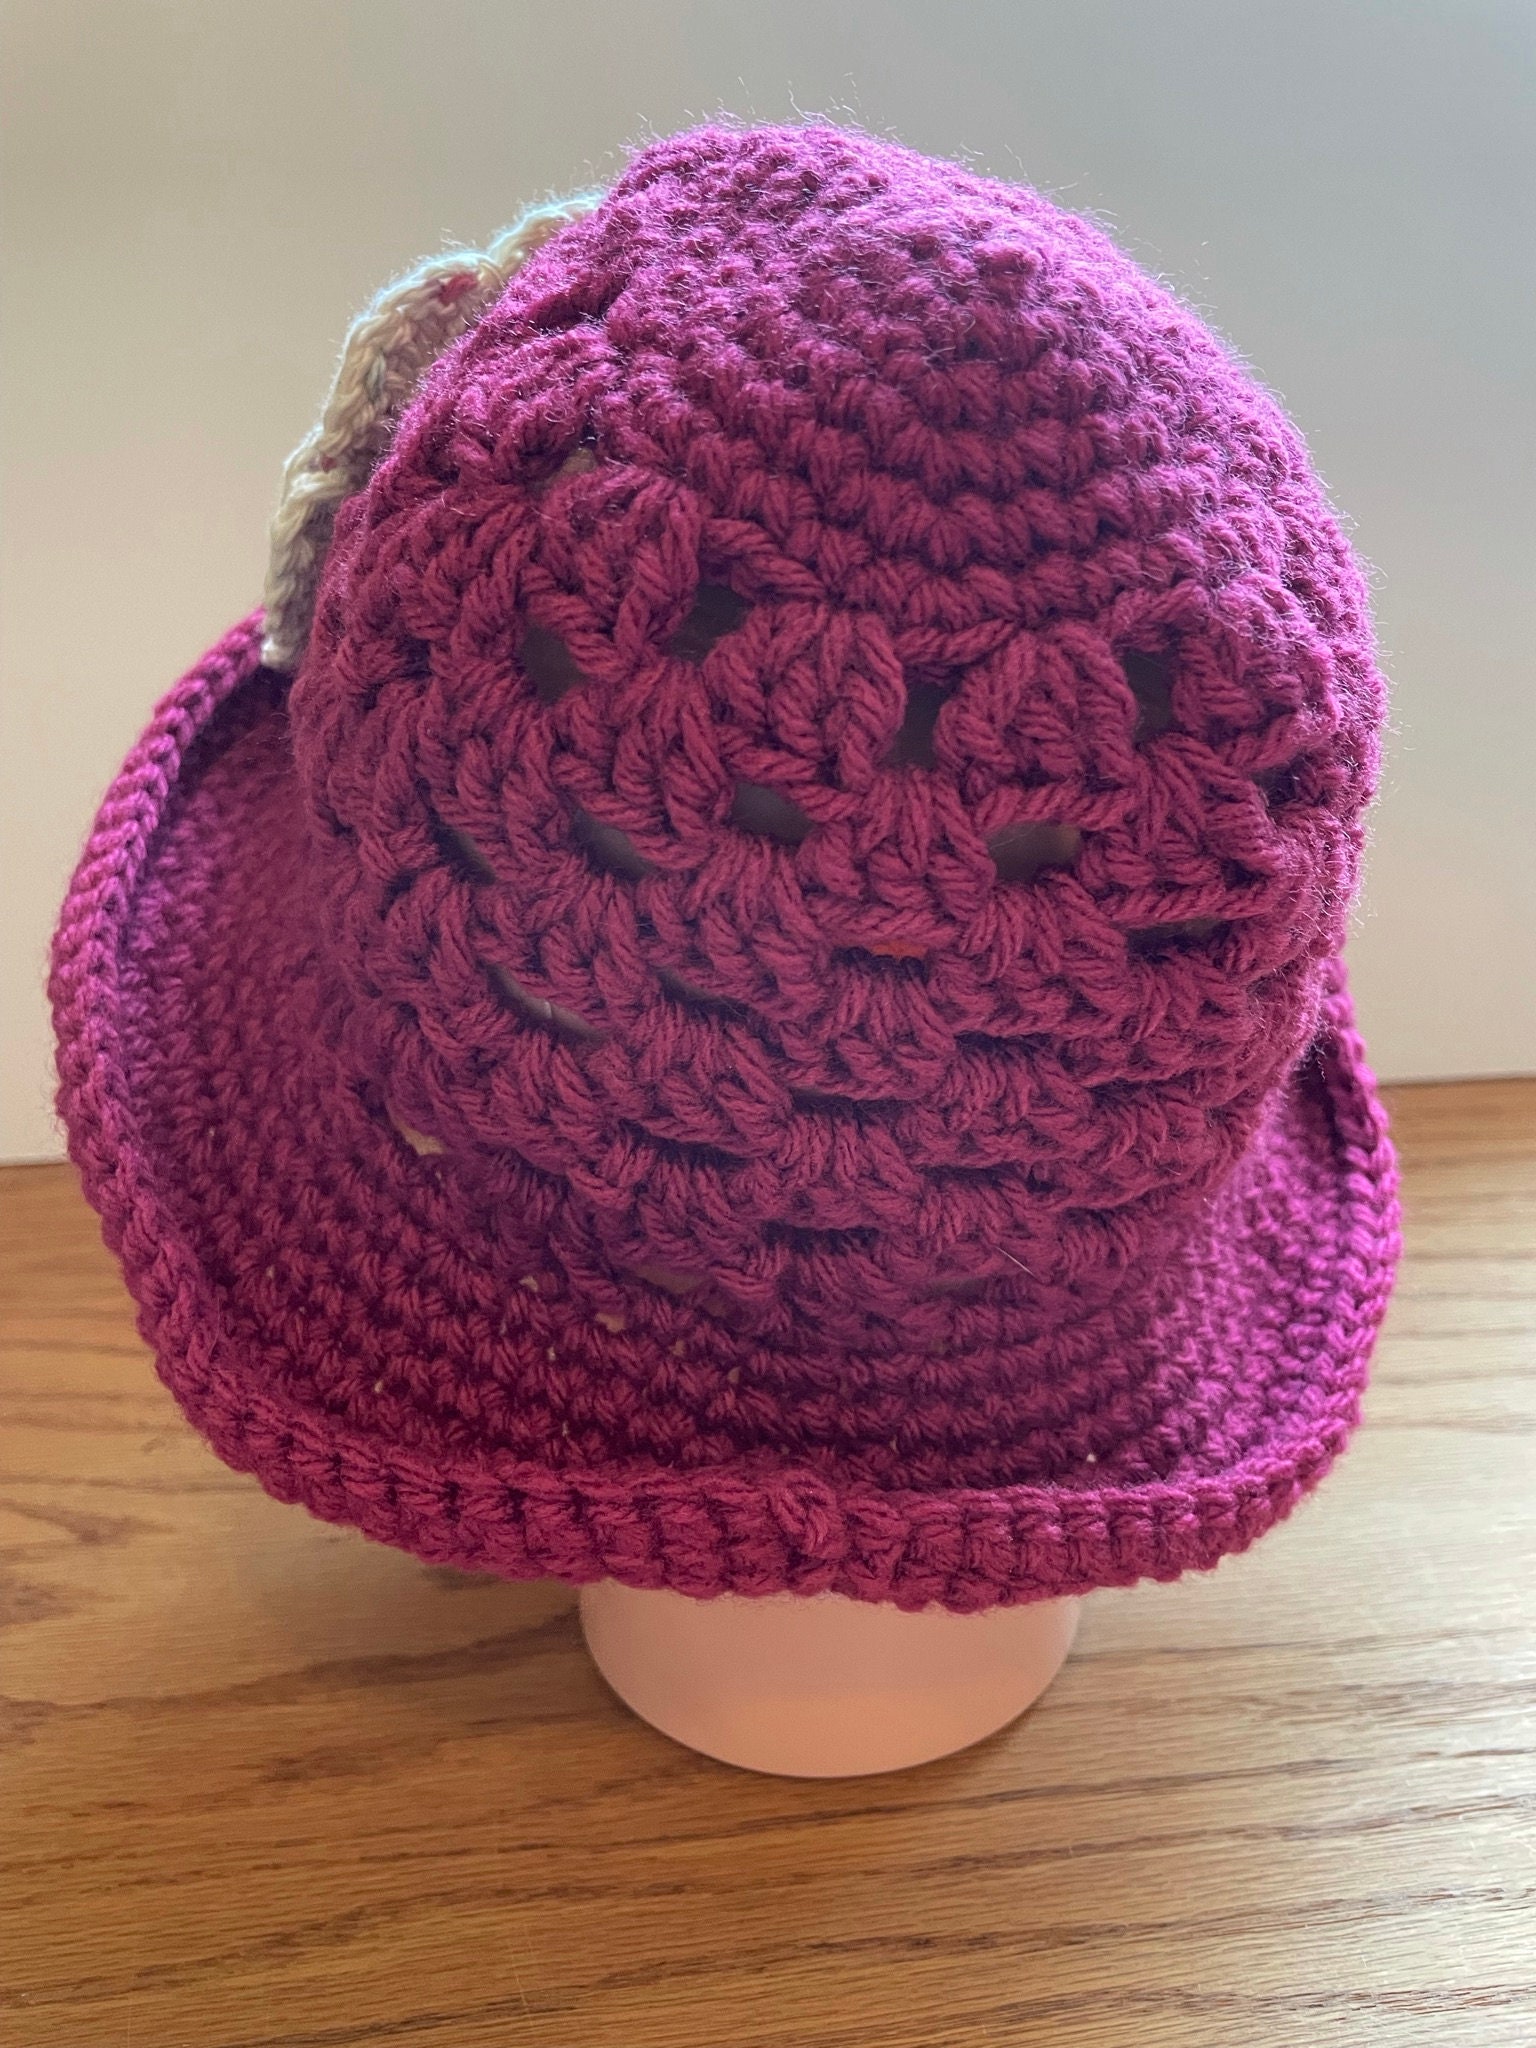 Little Girls Floppy Brim Hat in Raspberry With a Large White - Etsy